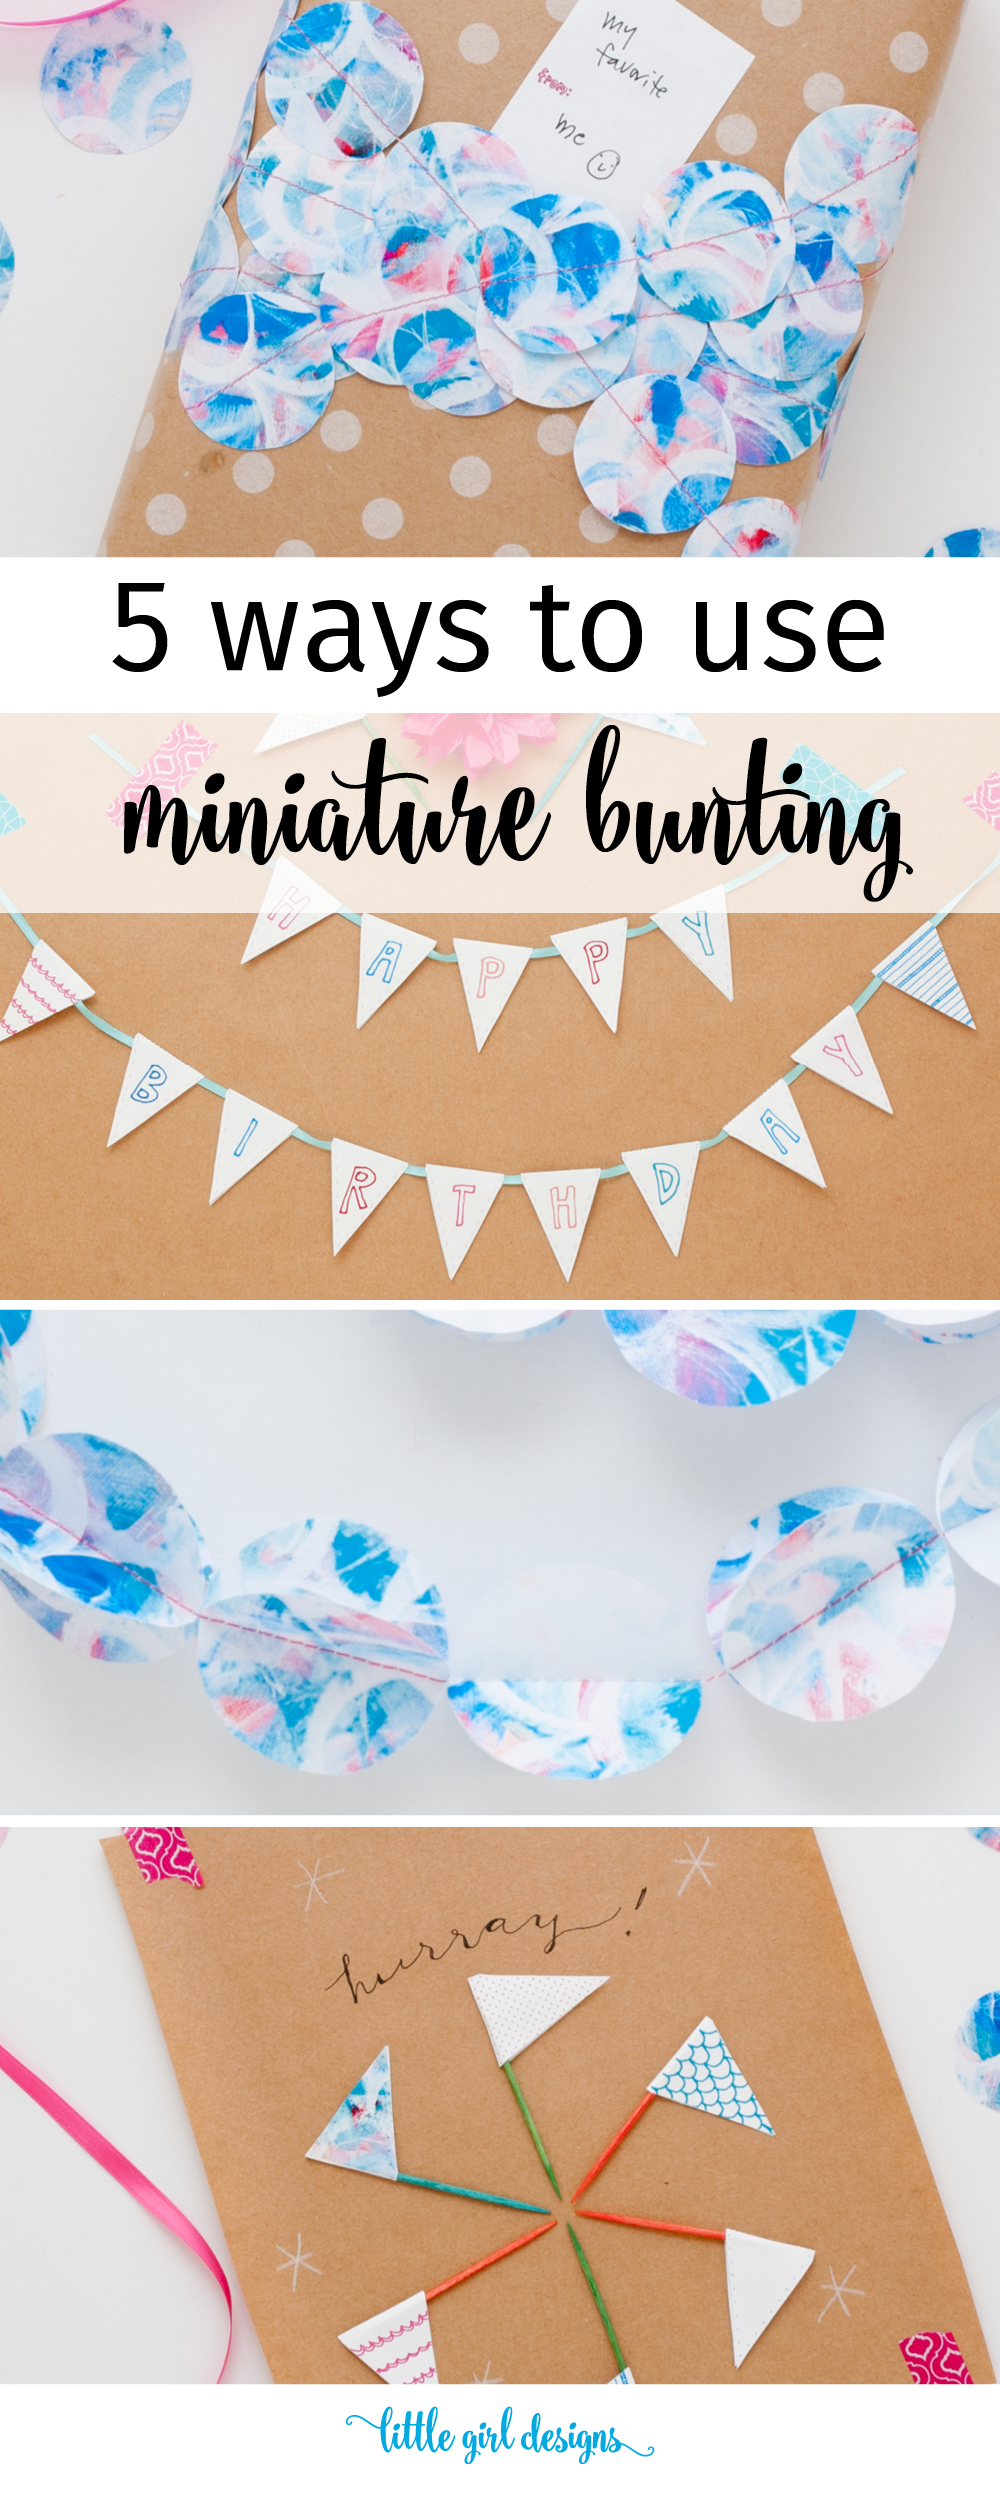 It's miniature bunting time! I love these ideas on how to use bunting—I'm definitely going to try these this year. :)